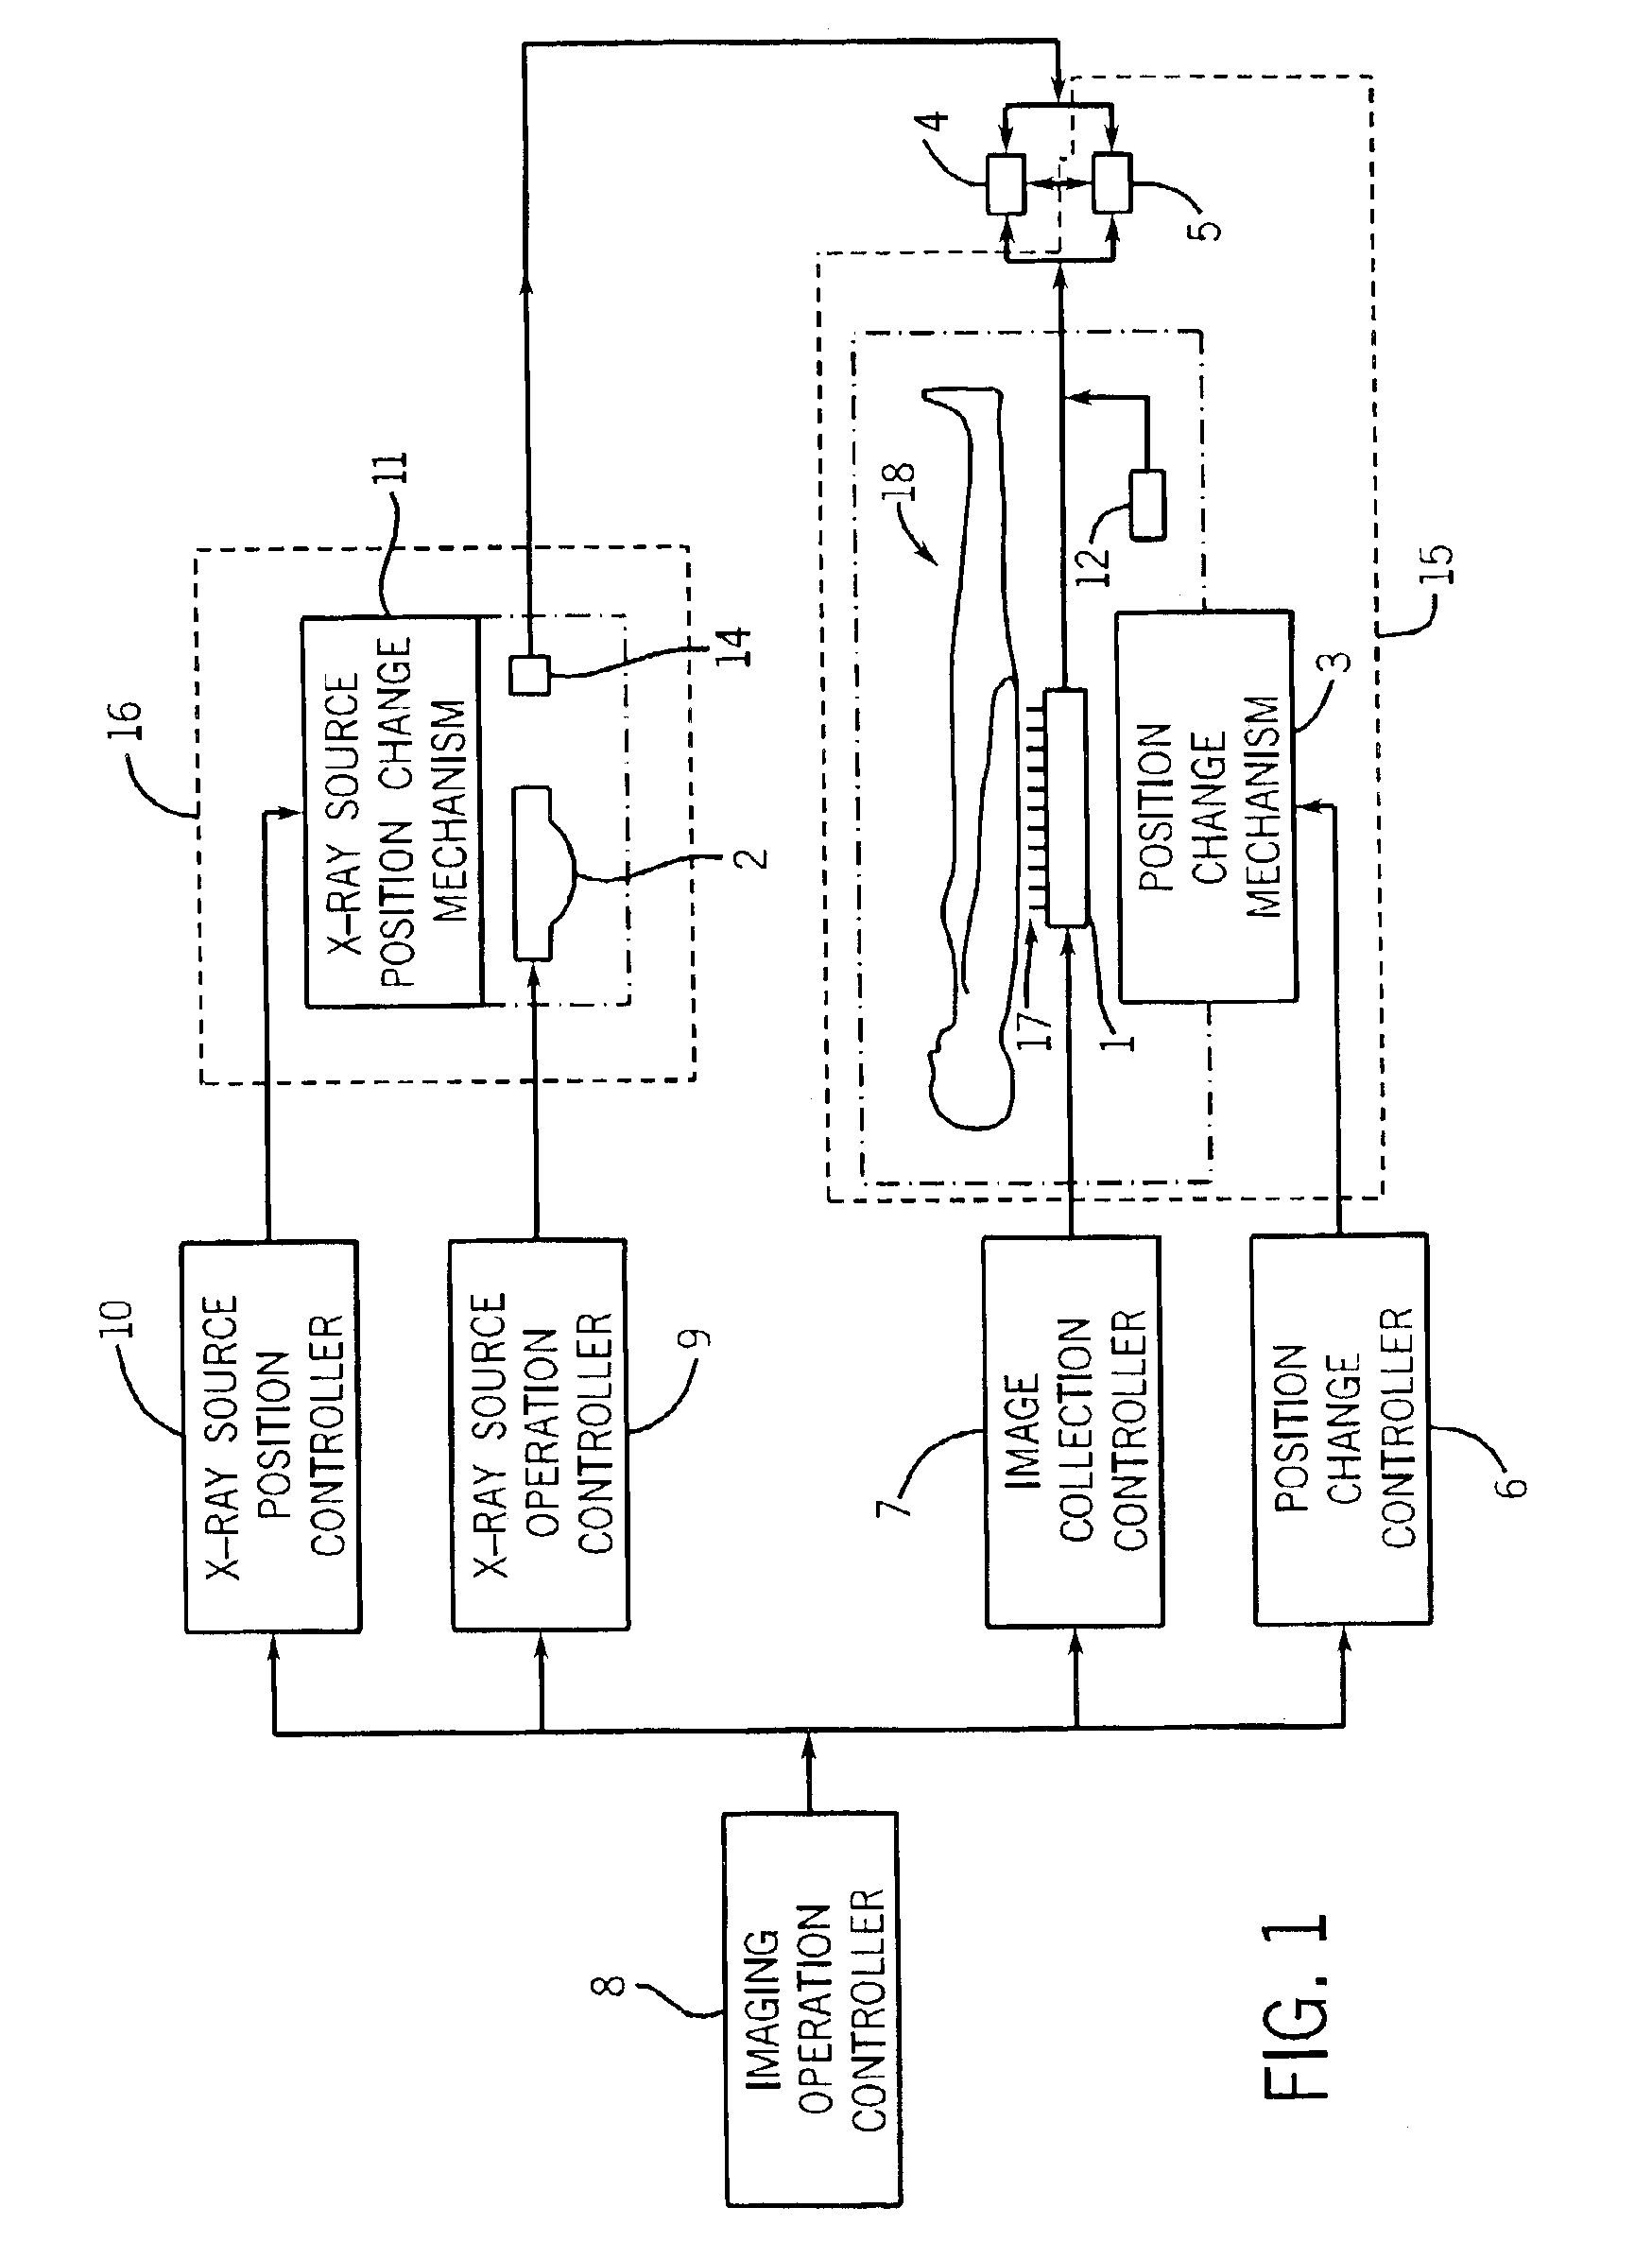 Image pasting using geometry measurement and a flat-panel detector